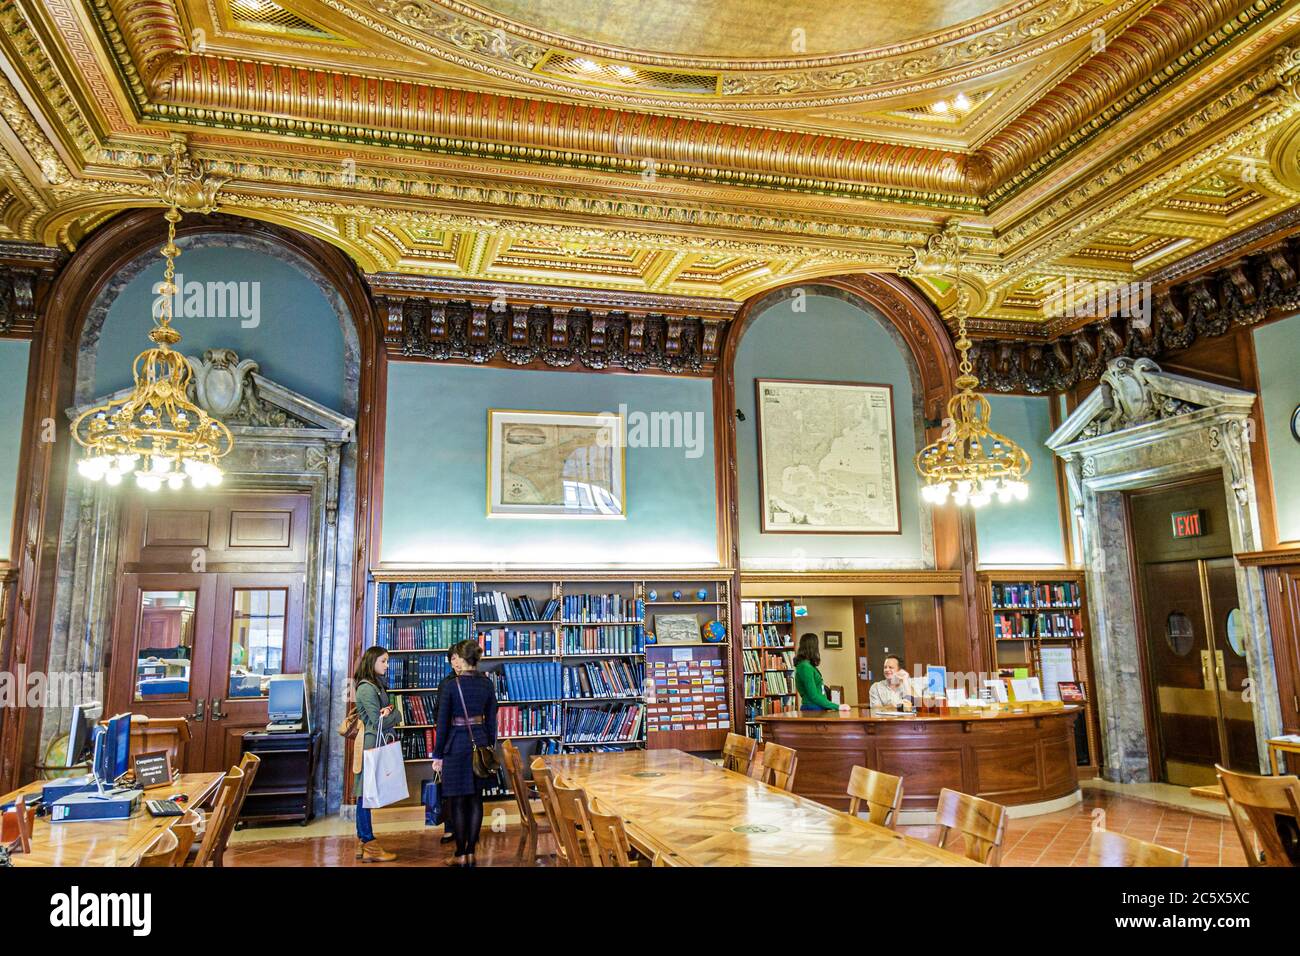 New York City,NYC NY Manhattan,Midtown,5th Fifth Avenue,New York Public Library,landmark historic building,knowledge,collection,book,books,map room,de Stock Photo